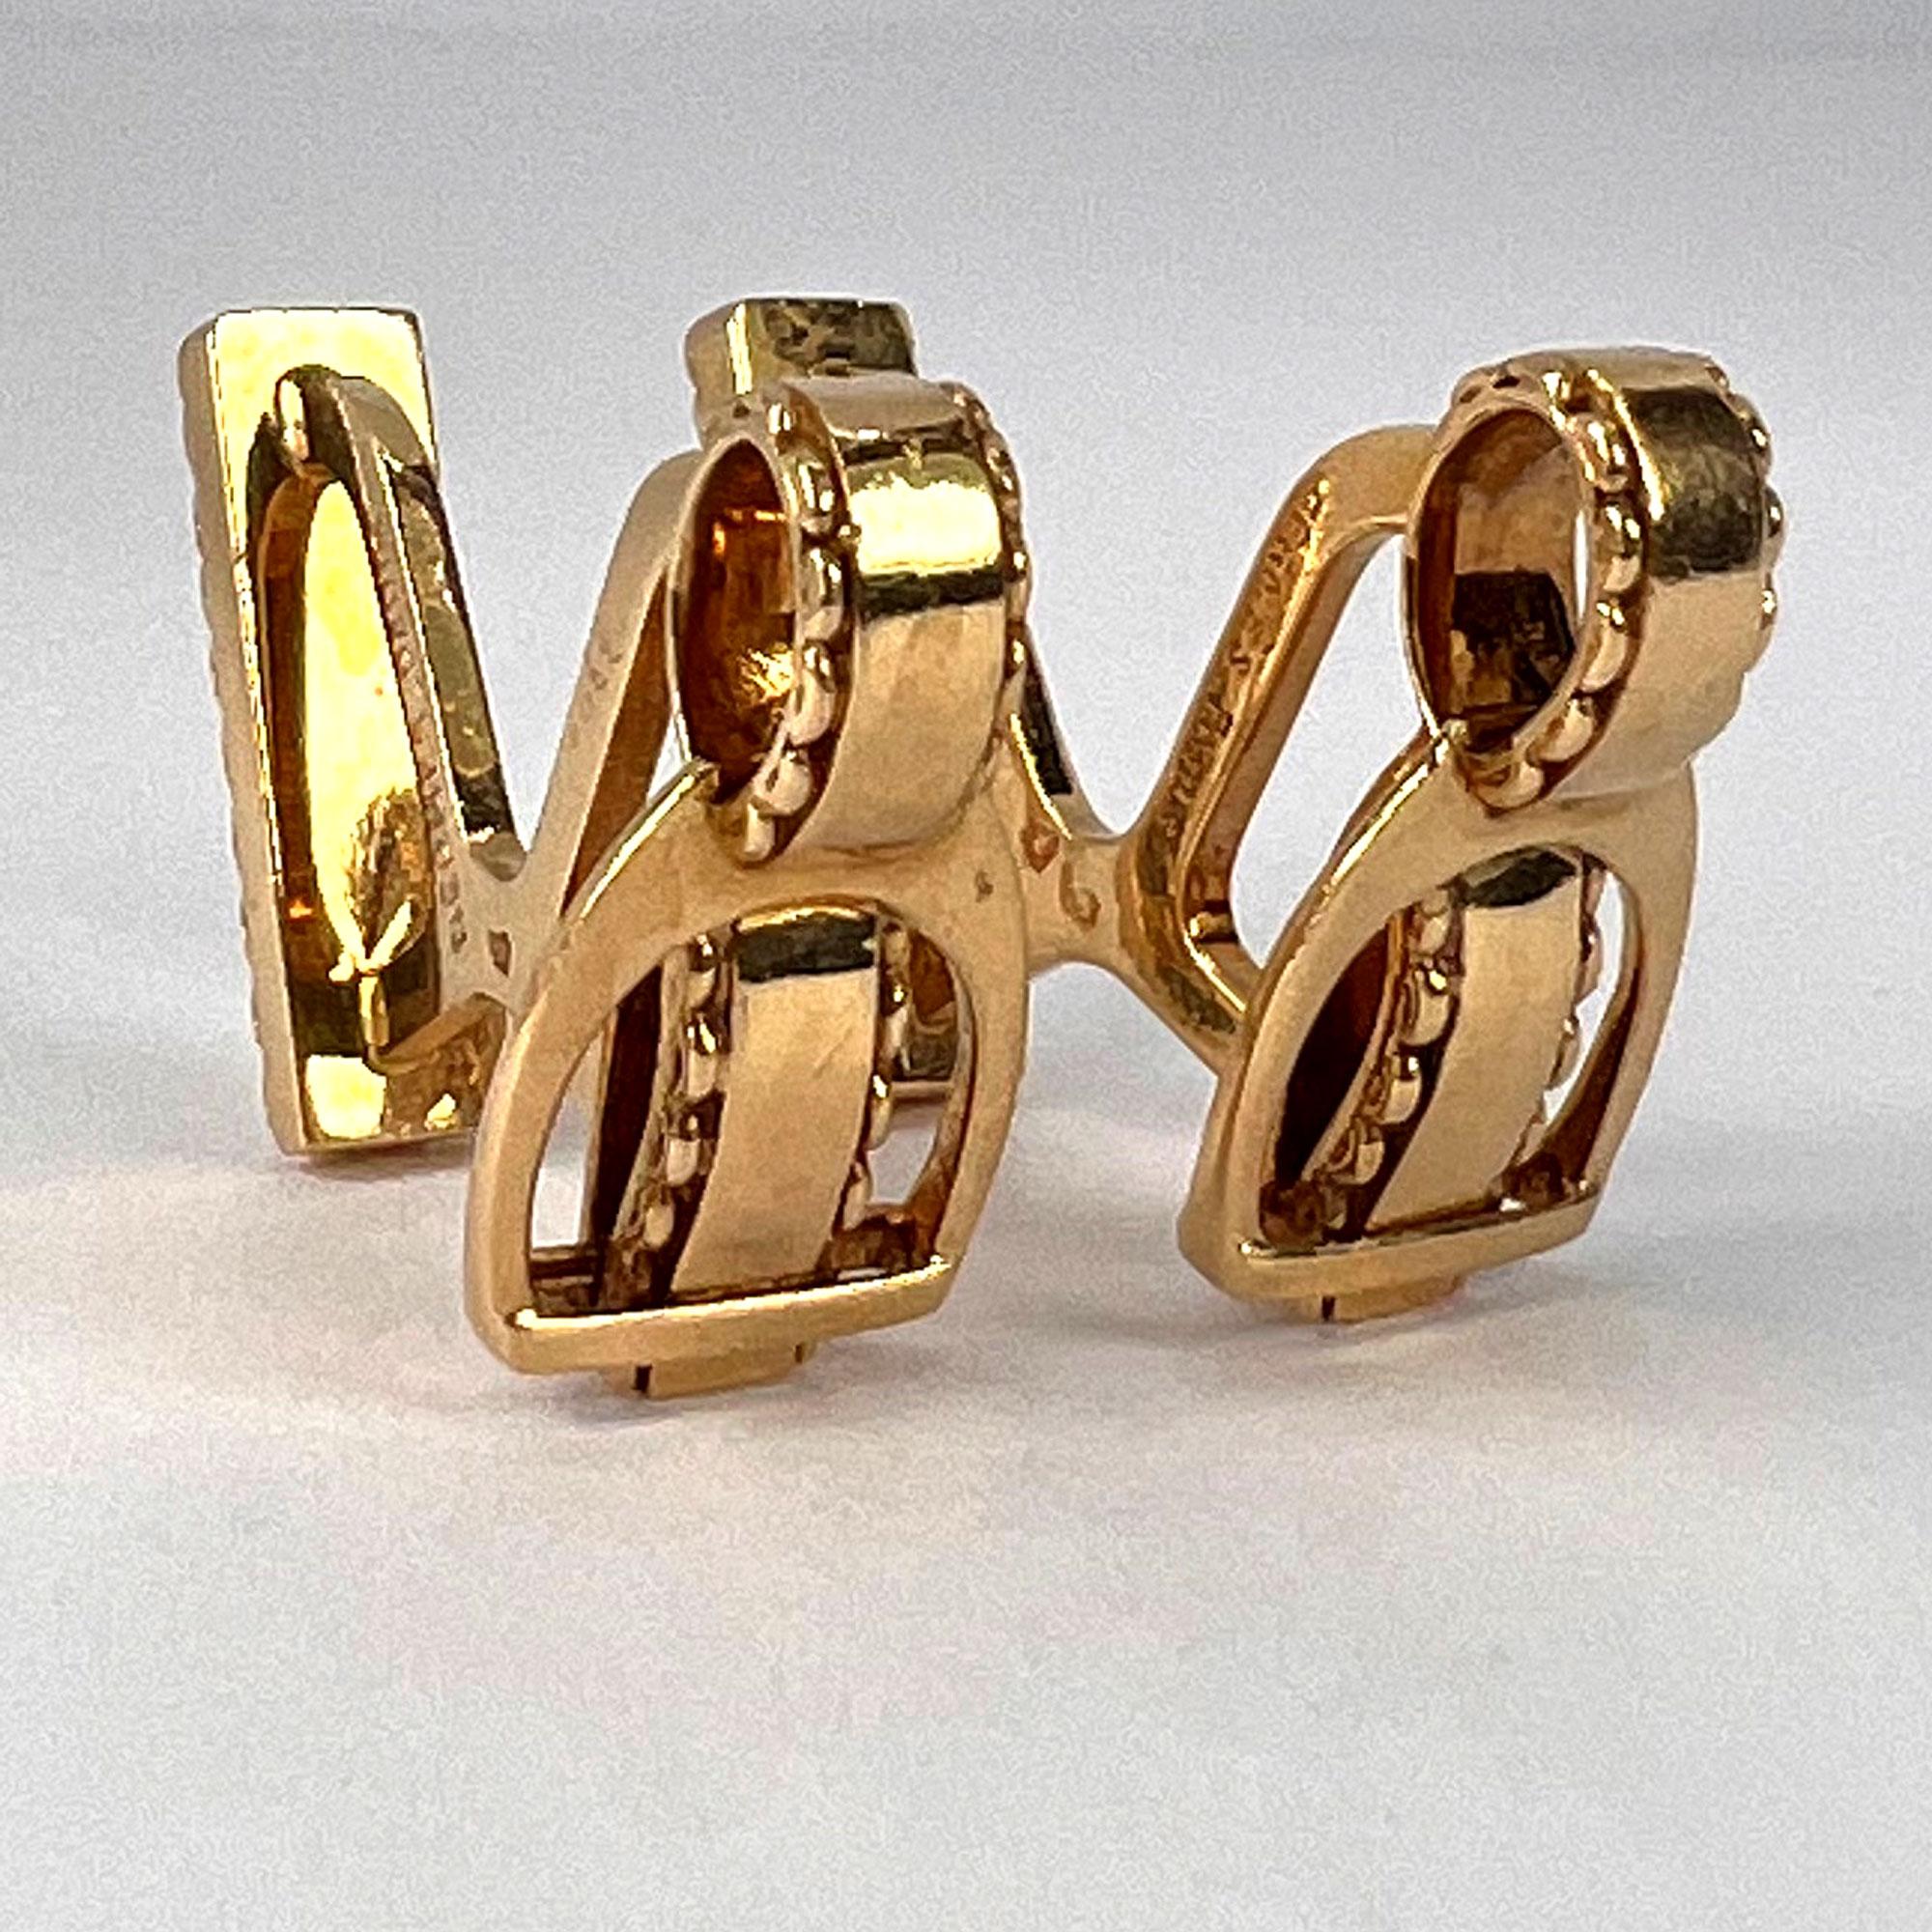 A pair of 18 karat (18K) yellow gold cufflinks, each designed as a stirrup on a leather strap, with a solid back. Signed Hermes Paris, stamped with the eagle mark for 18 karat gold and French manufacture, maker’s mark for Atlor and scratch numbered